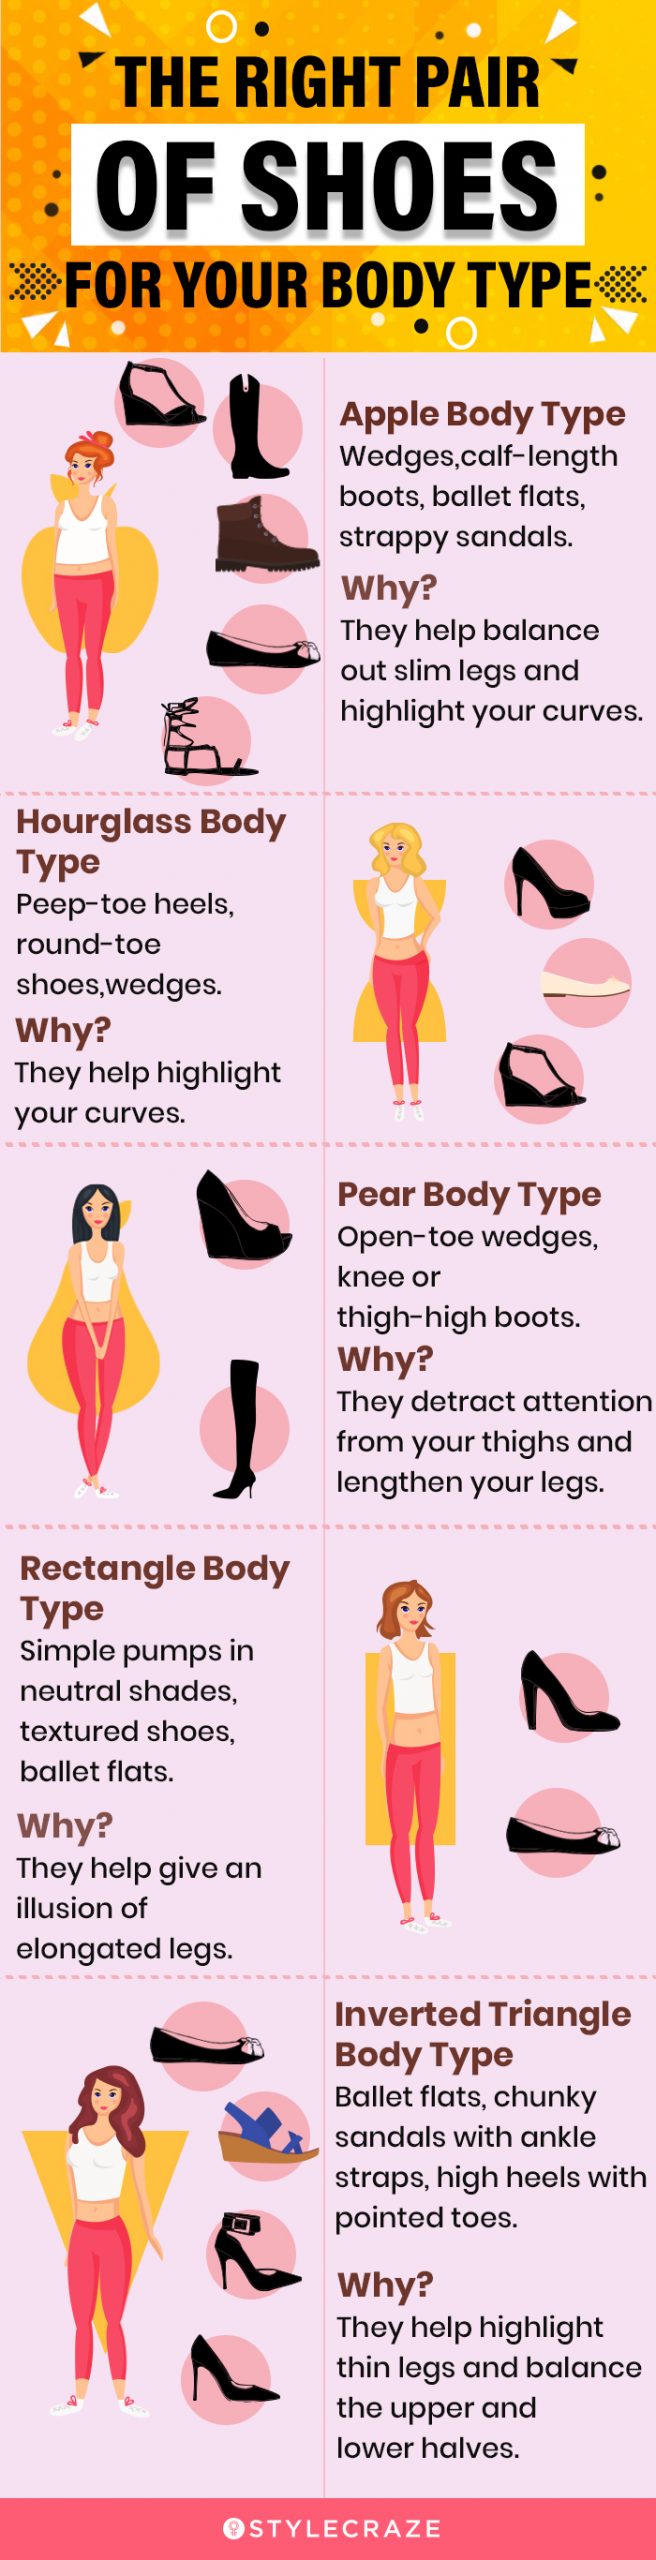 the right pair of shoes for your body type [infographic]